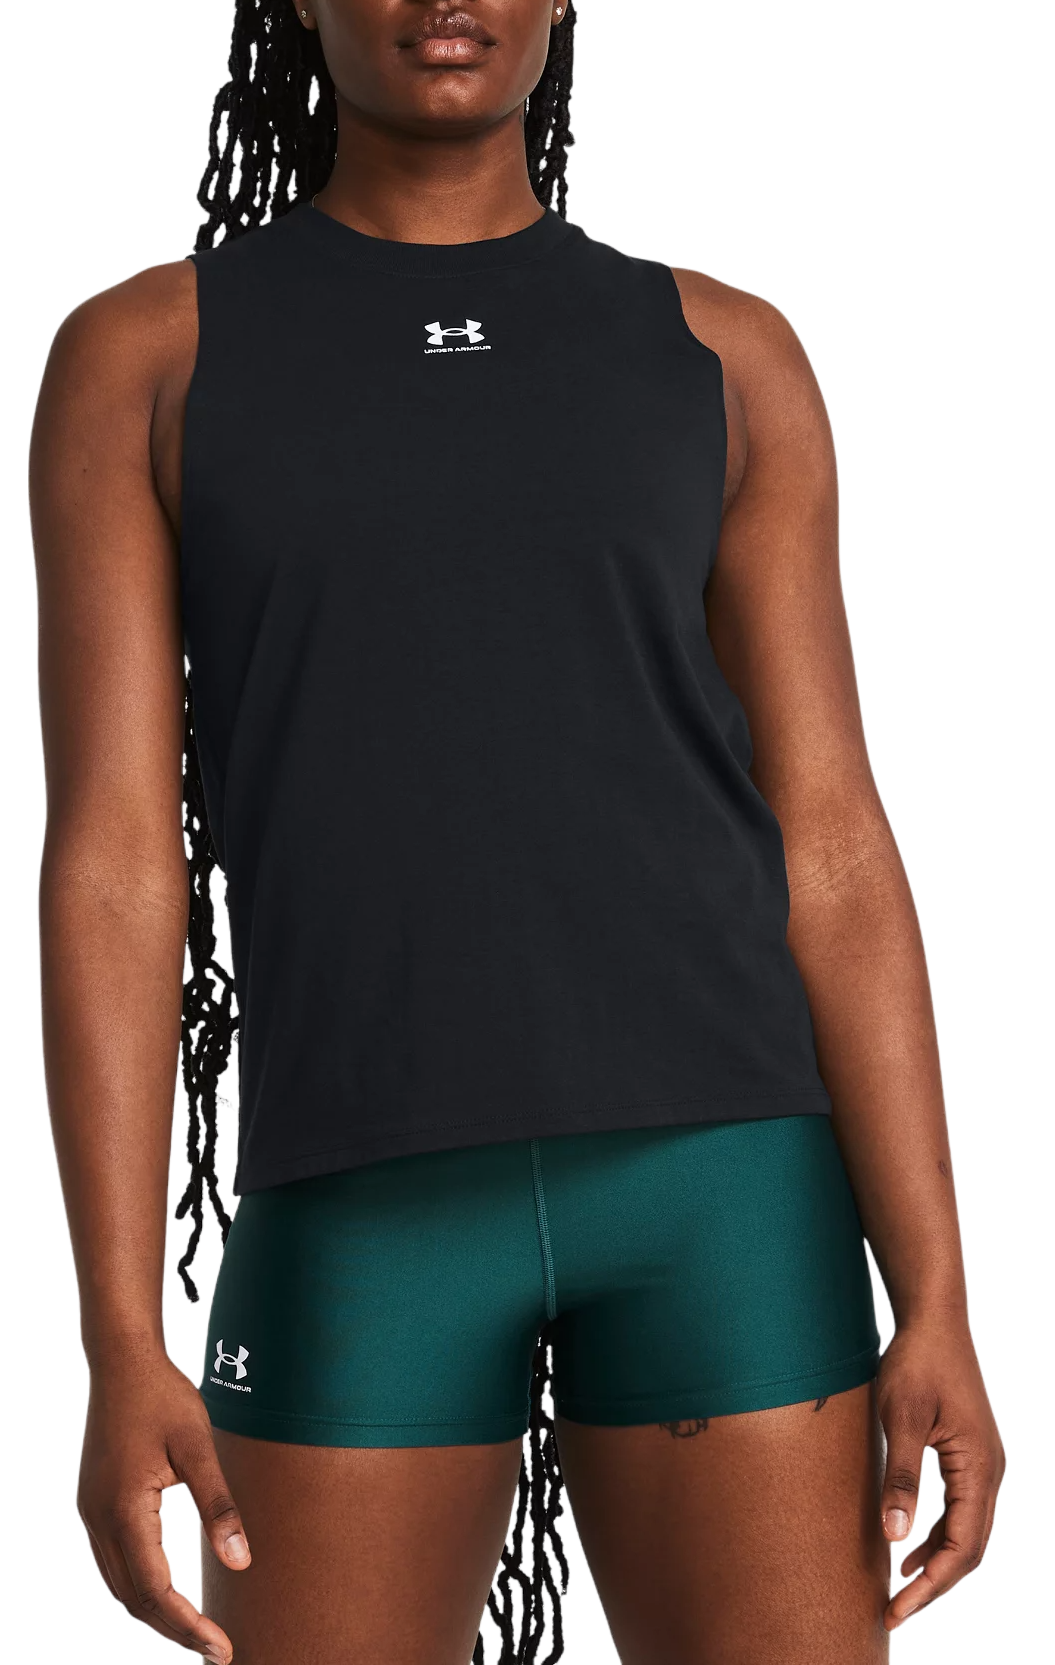 Singlet Under Armour Campus Muscle Tank